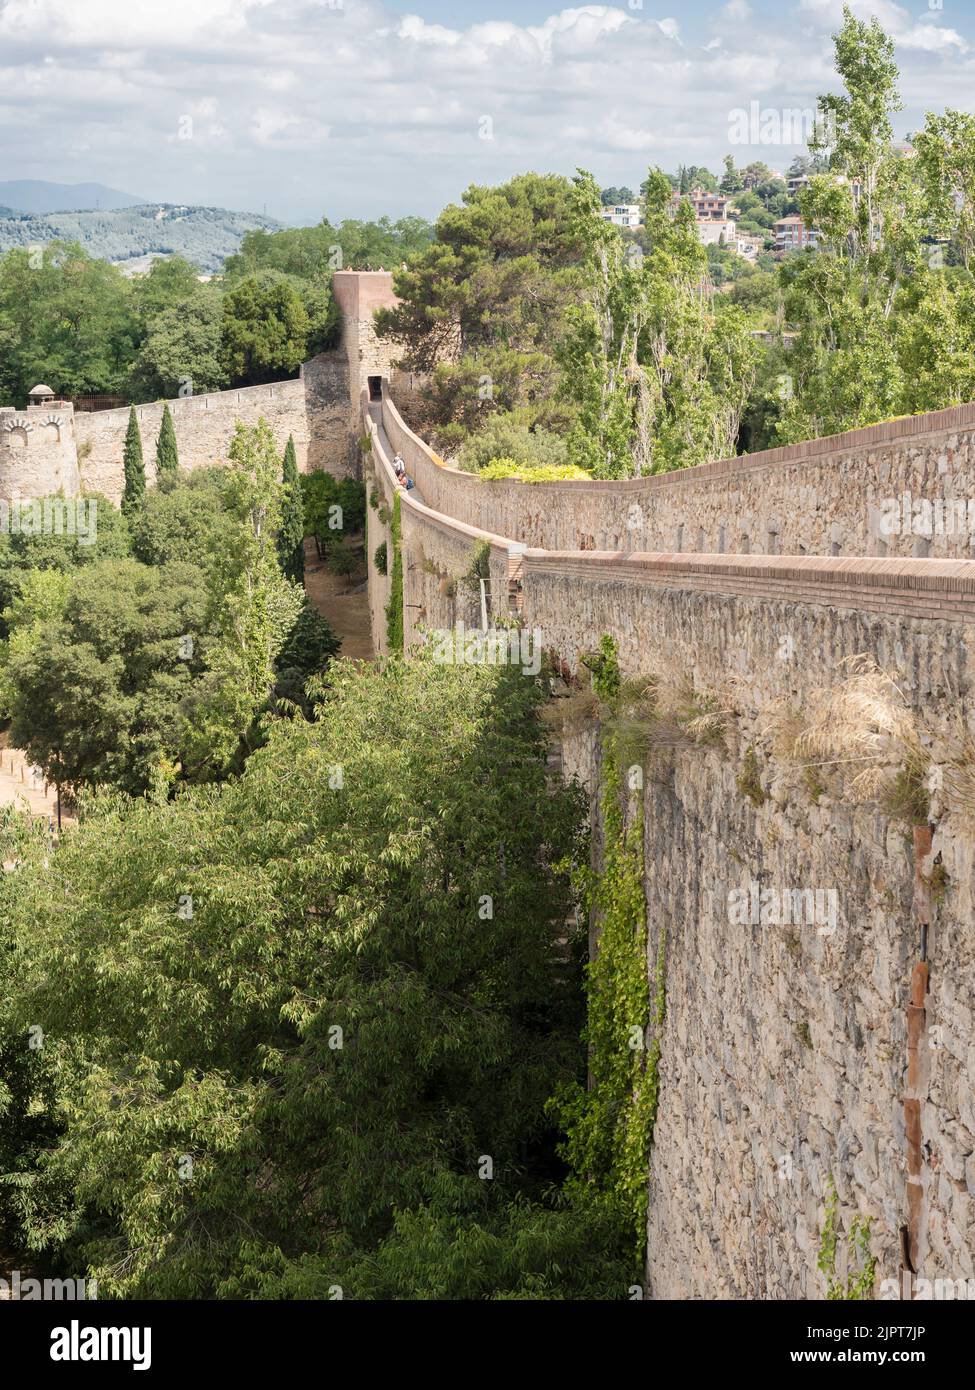 Girona, Spain - 26 June 2022: view of the ancient city wall of Girona in Catalunia, Spain. Stock Photo